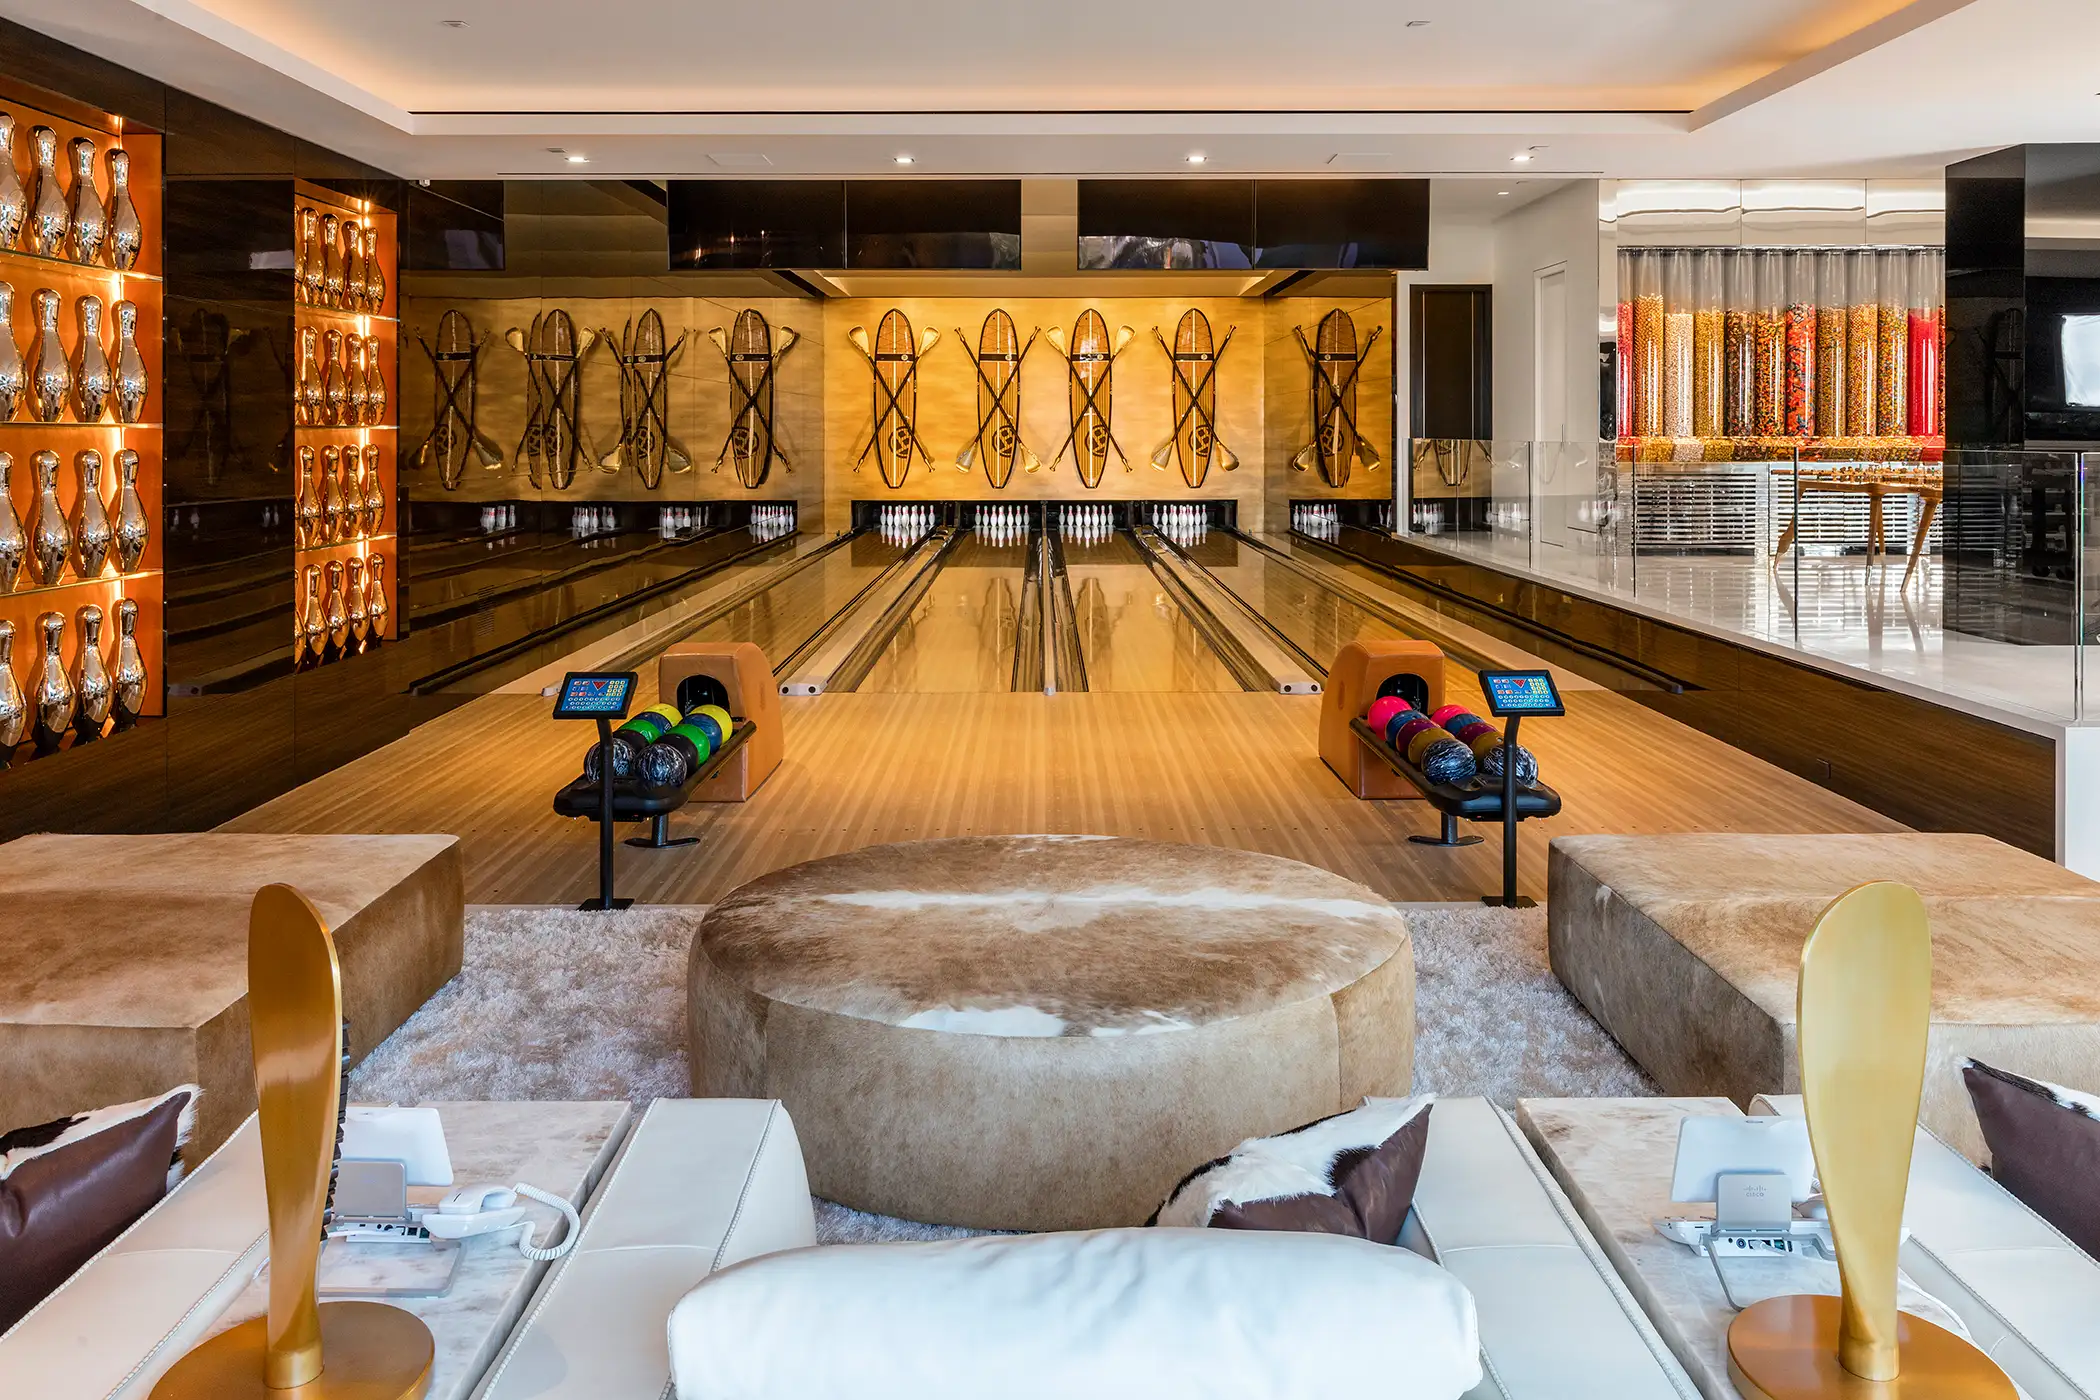 $250 Million Bel Air Home Bowling Alley